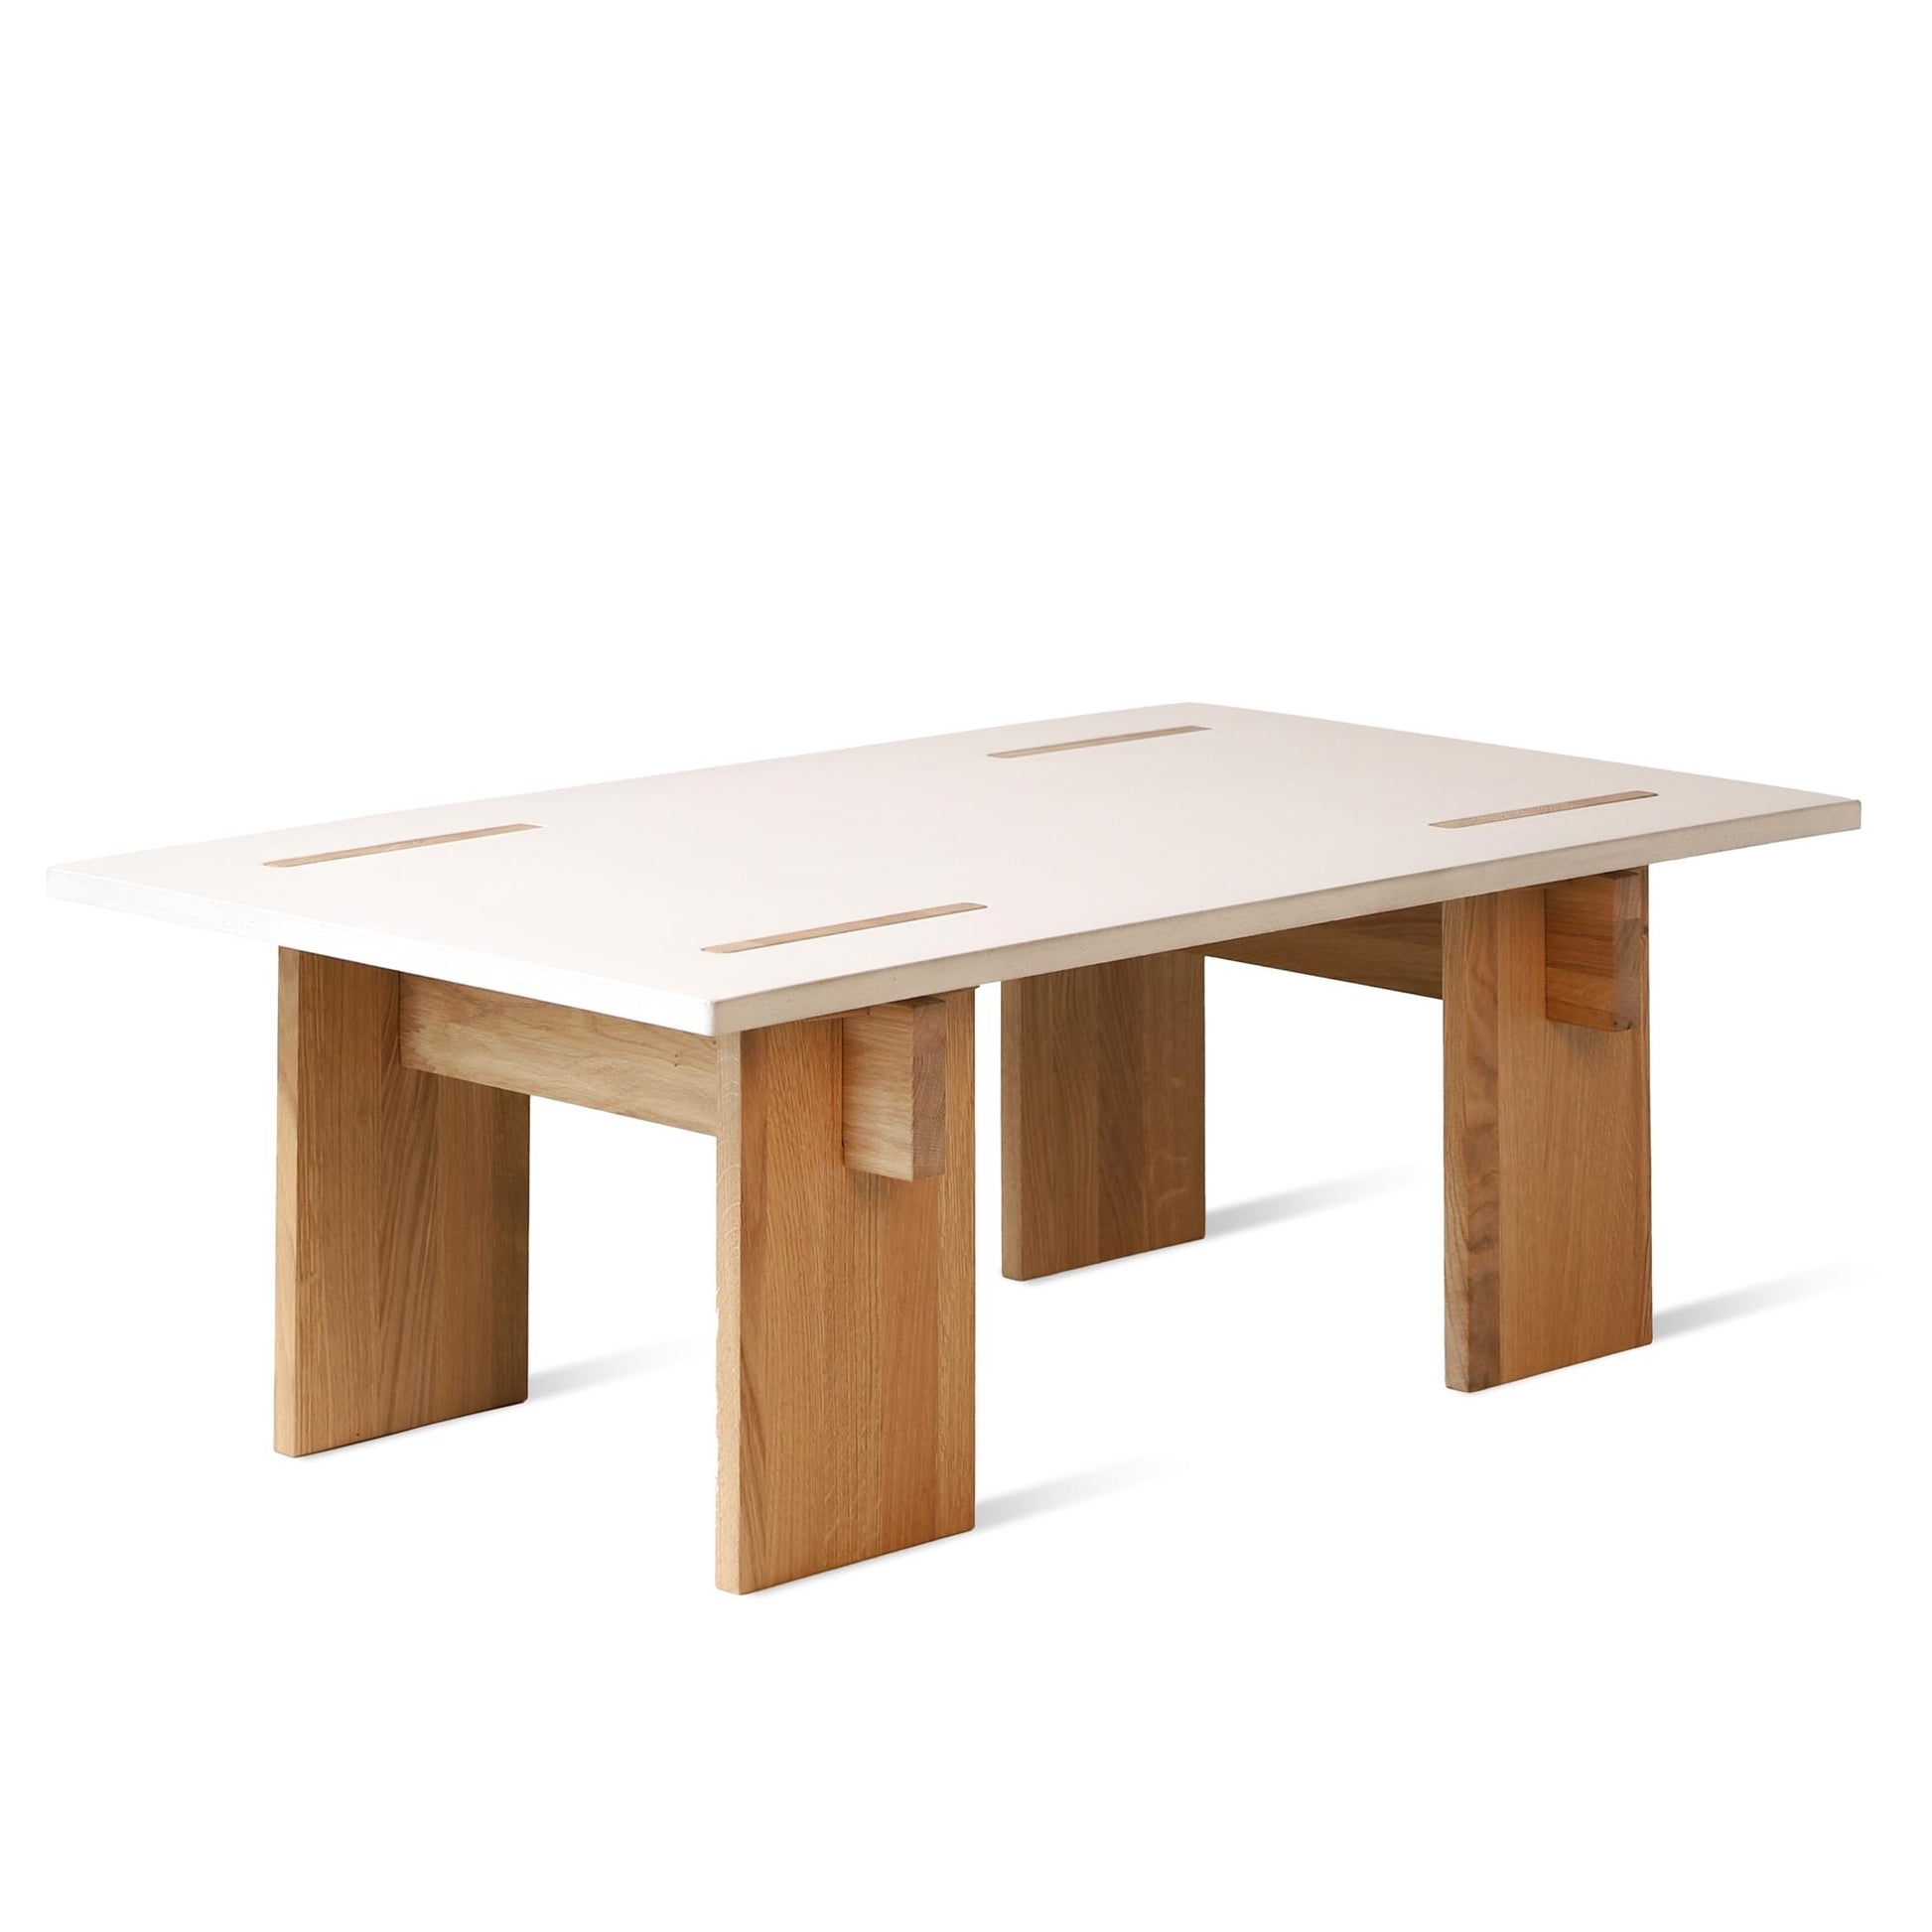 Arnold Coffee Table - Limited Edition by Eberhart #Concrete / Light oak